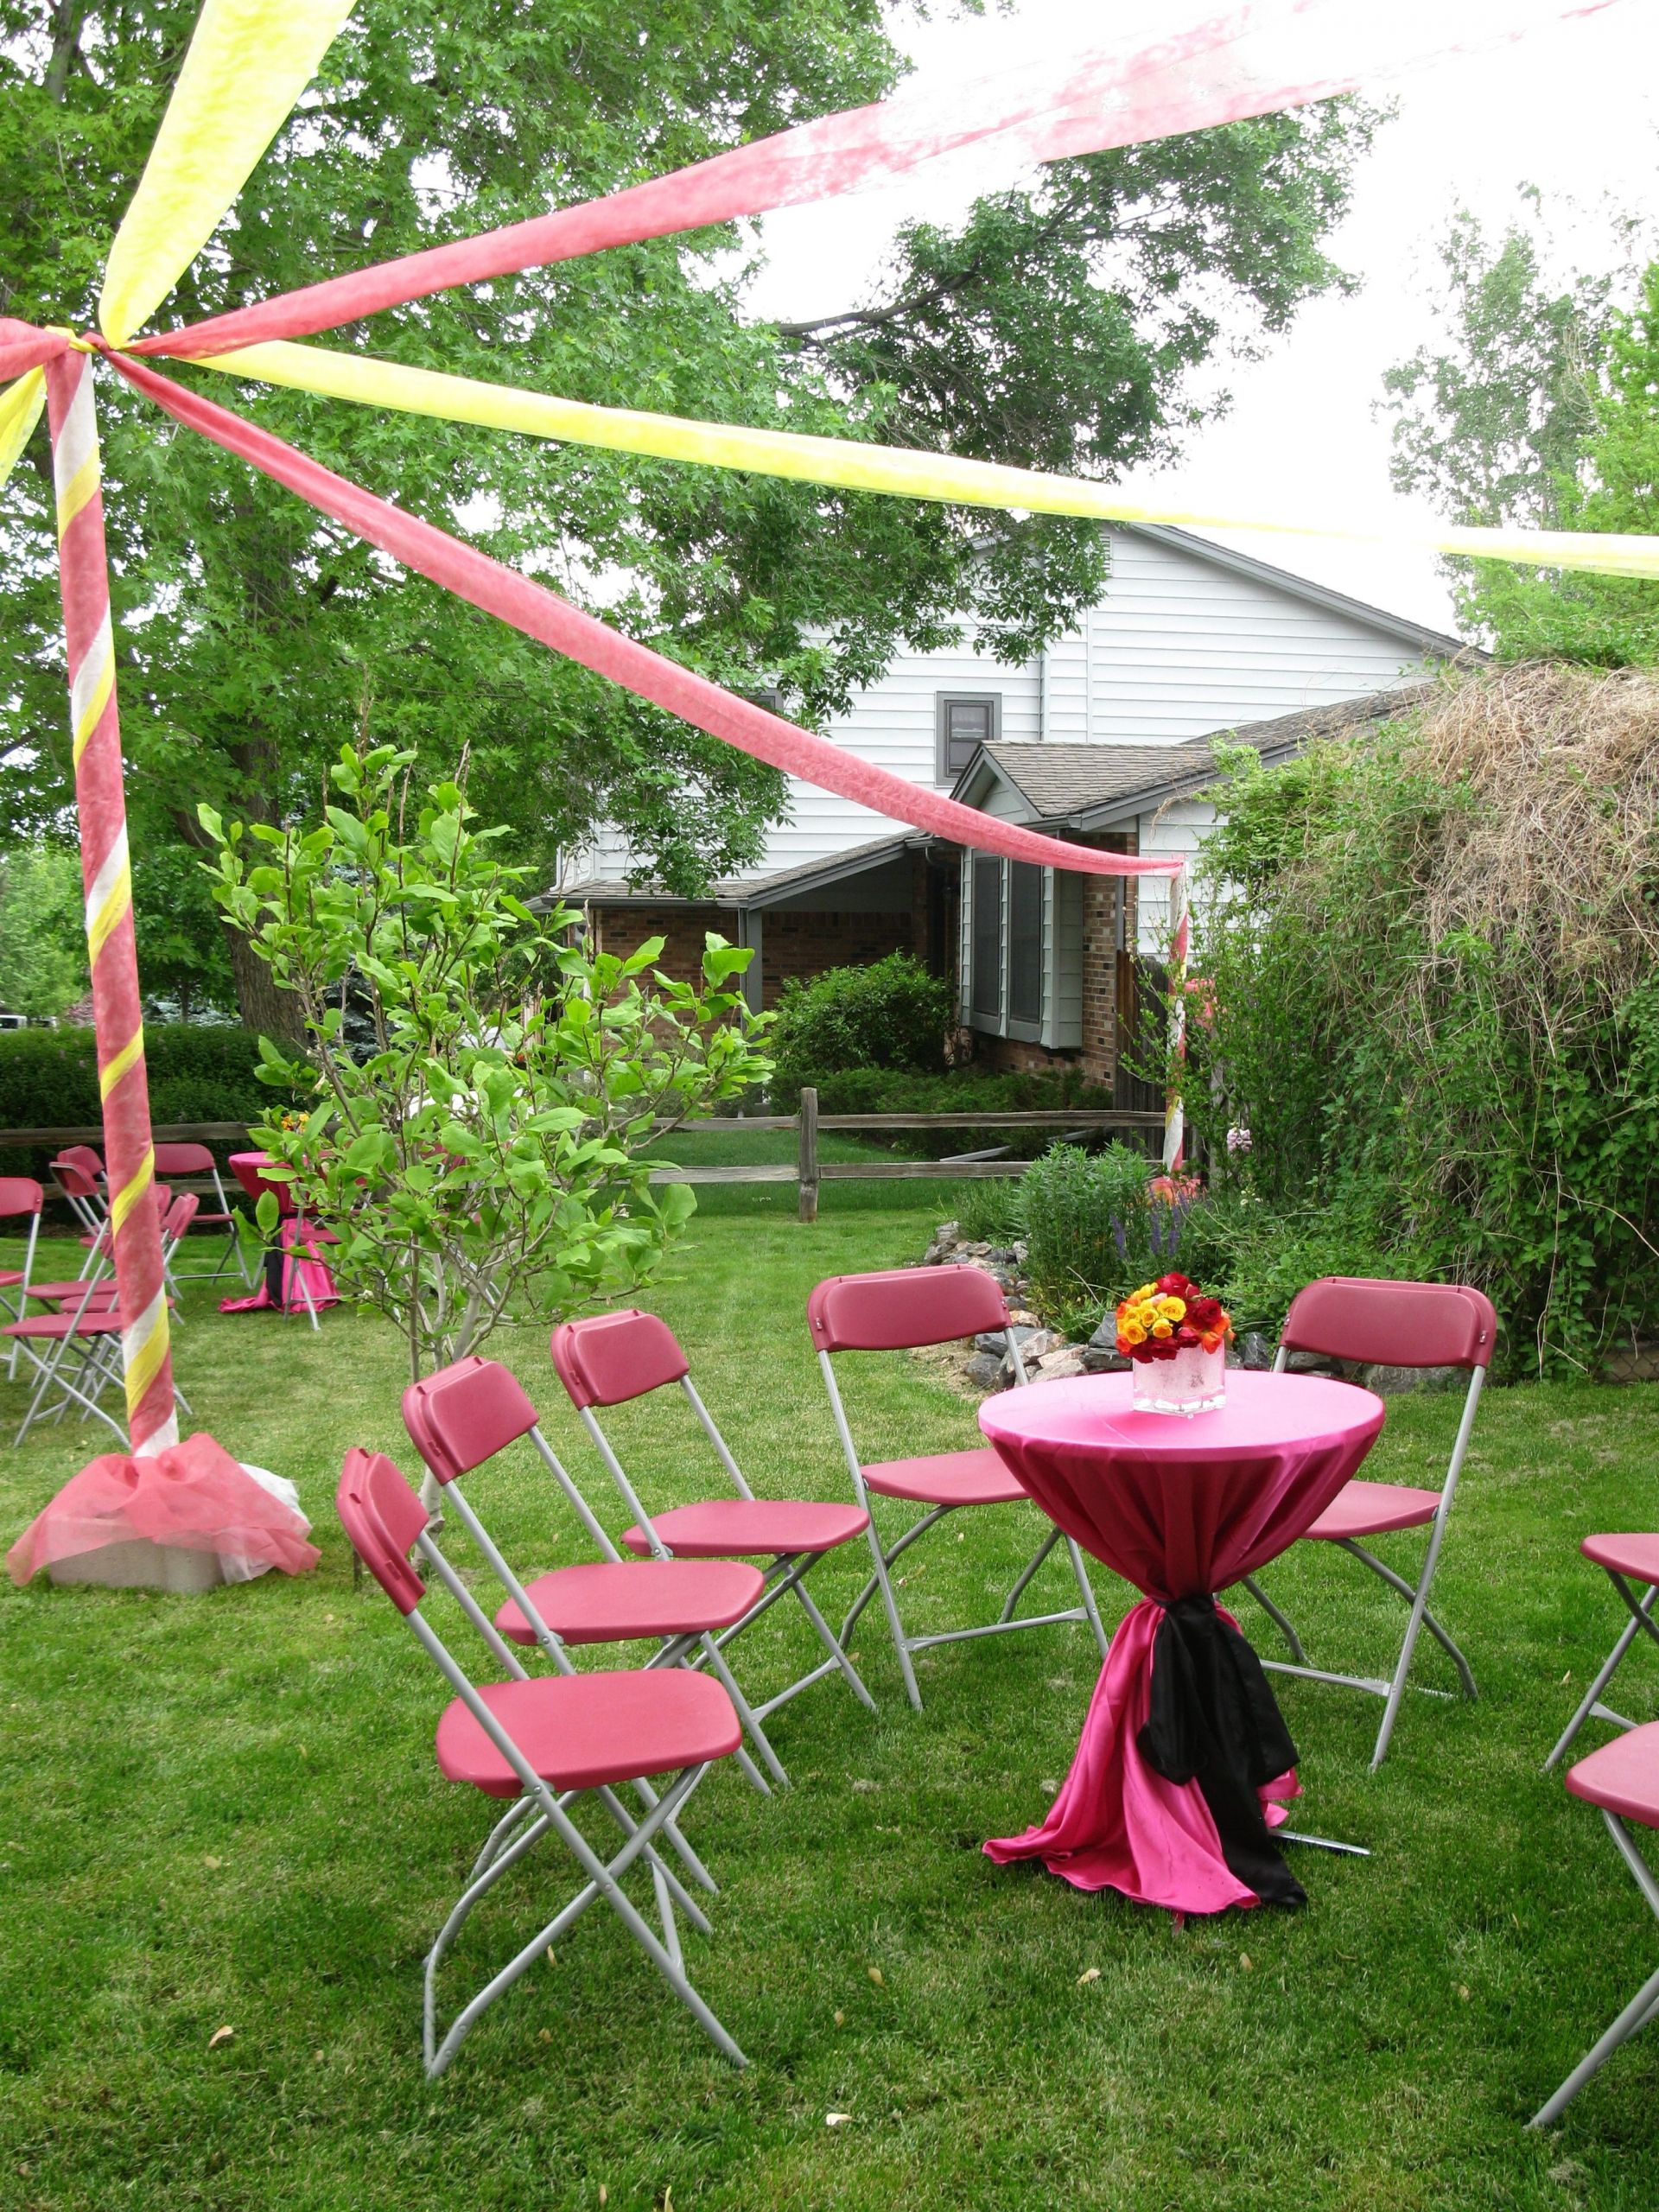 Graduation Party Outside Ideas
 Graduation parties red and yellow outdoor party